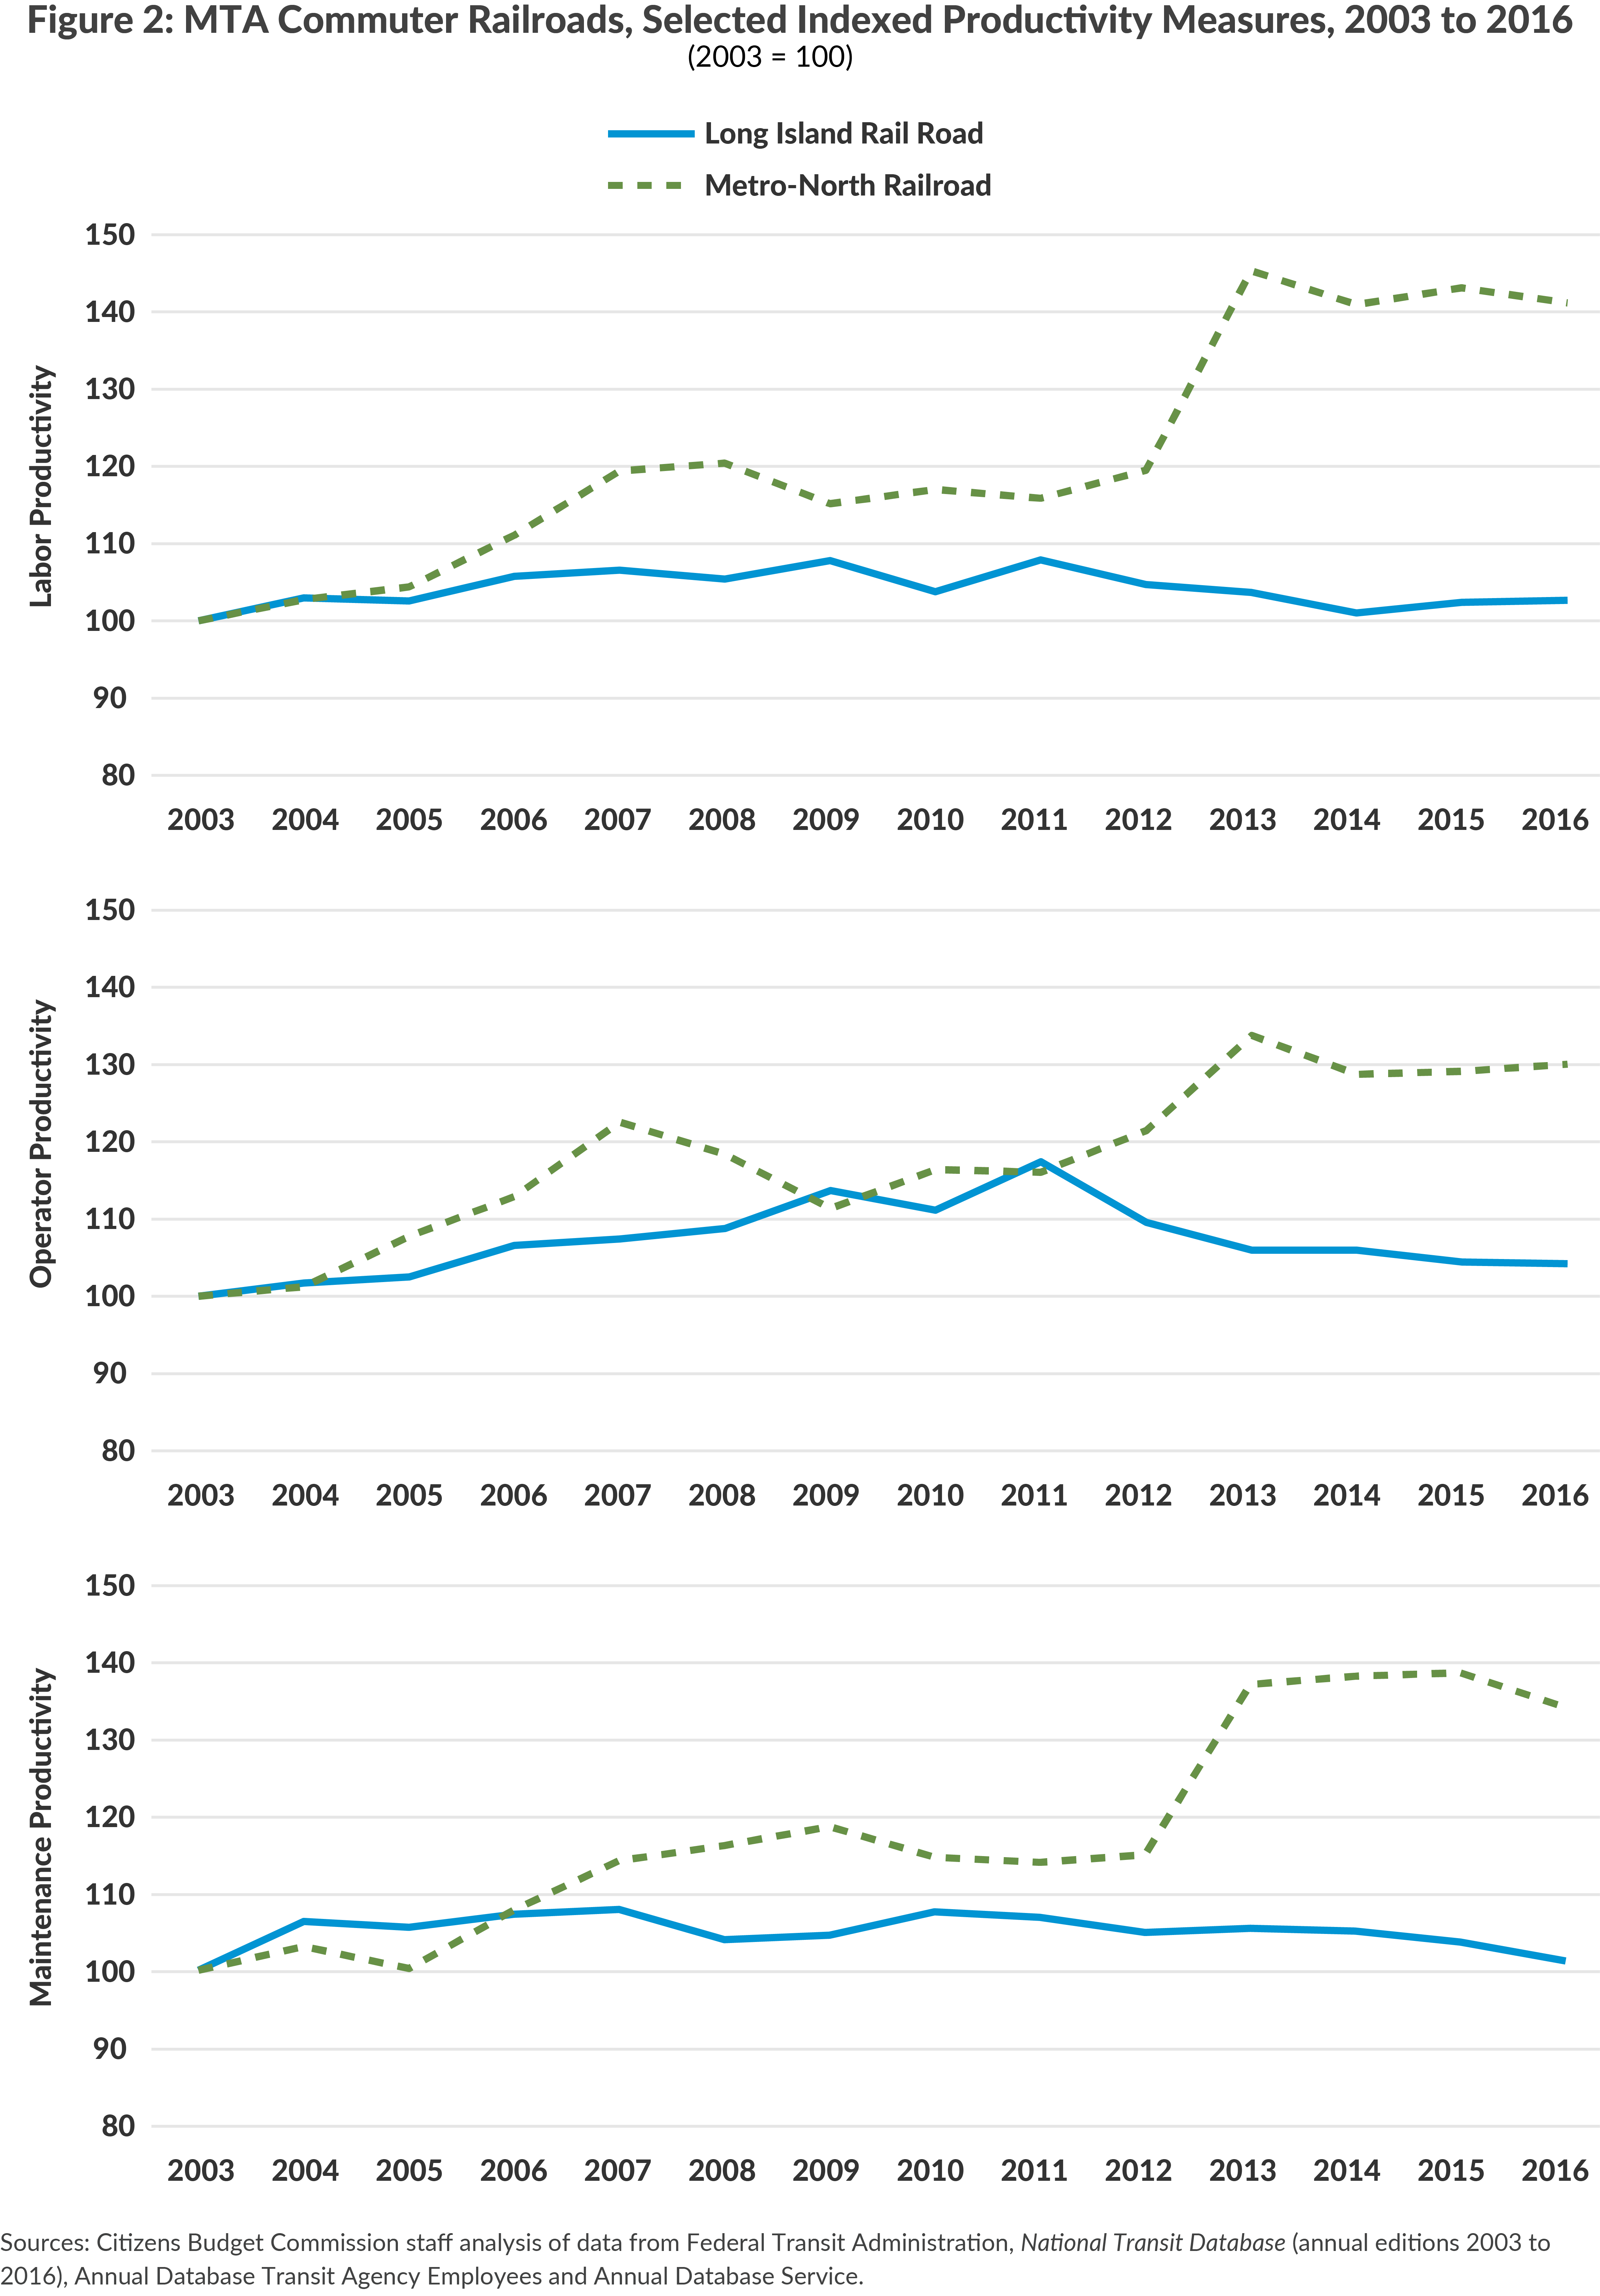 Figure 2: MTA Commuter Railroads, Selected Indexed Productivity Measures, 2003 to 2016